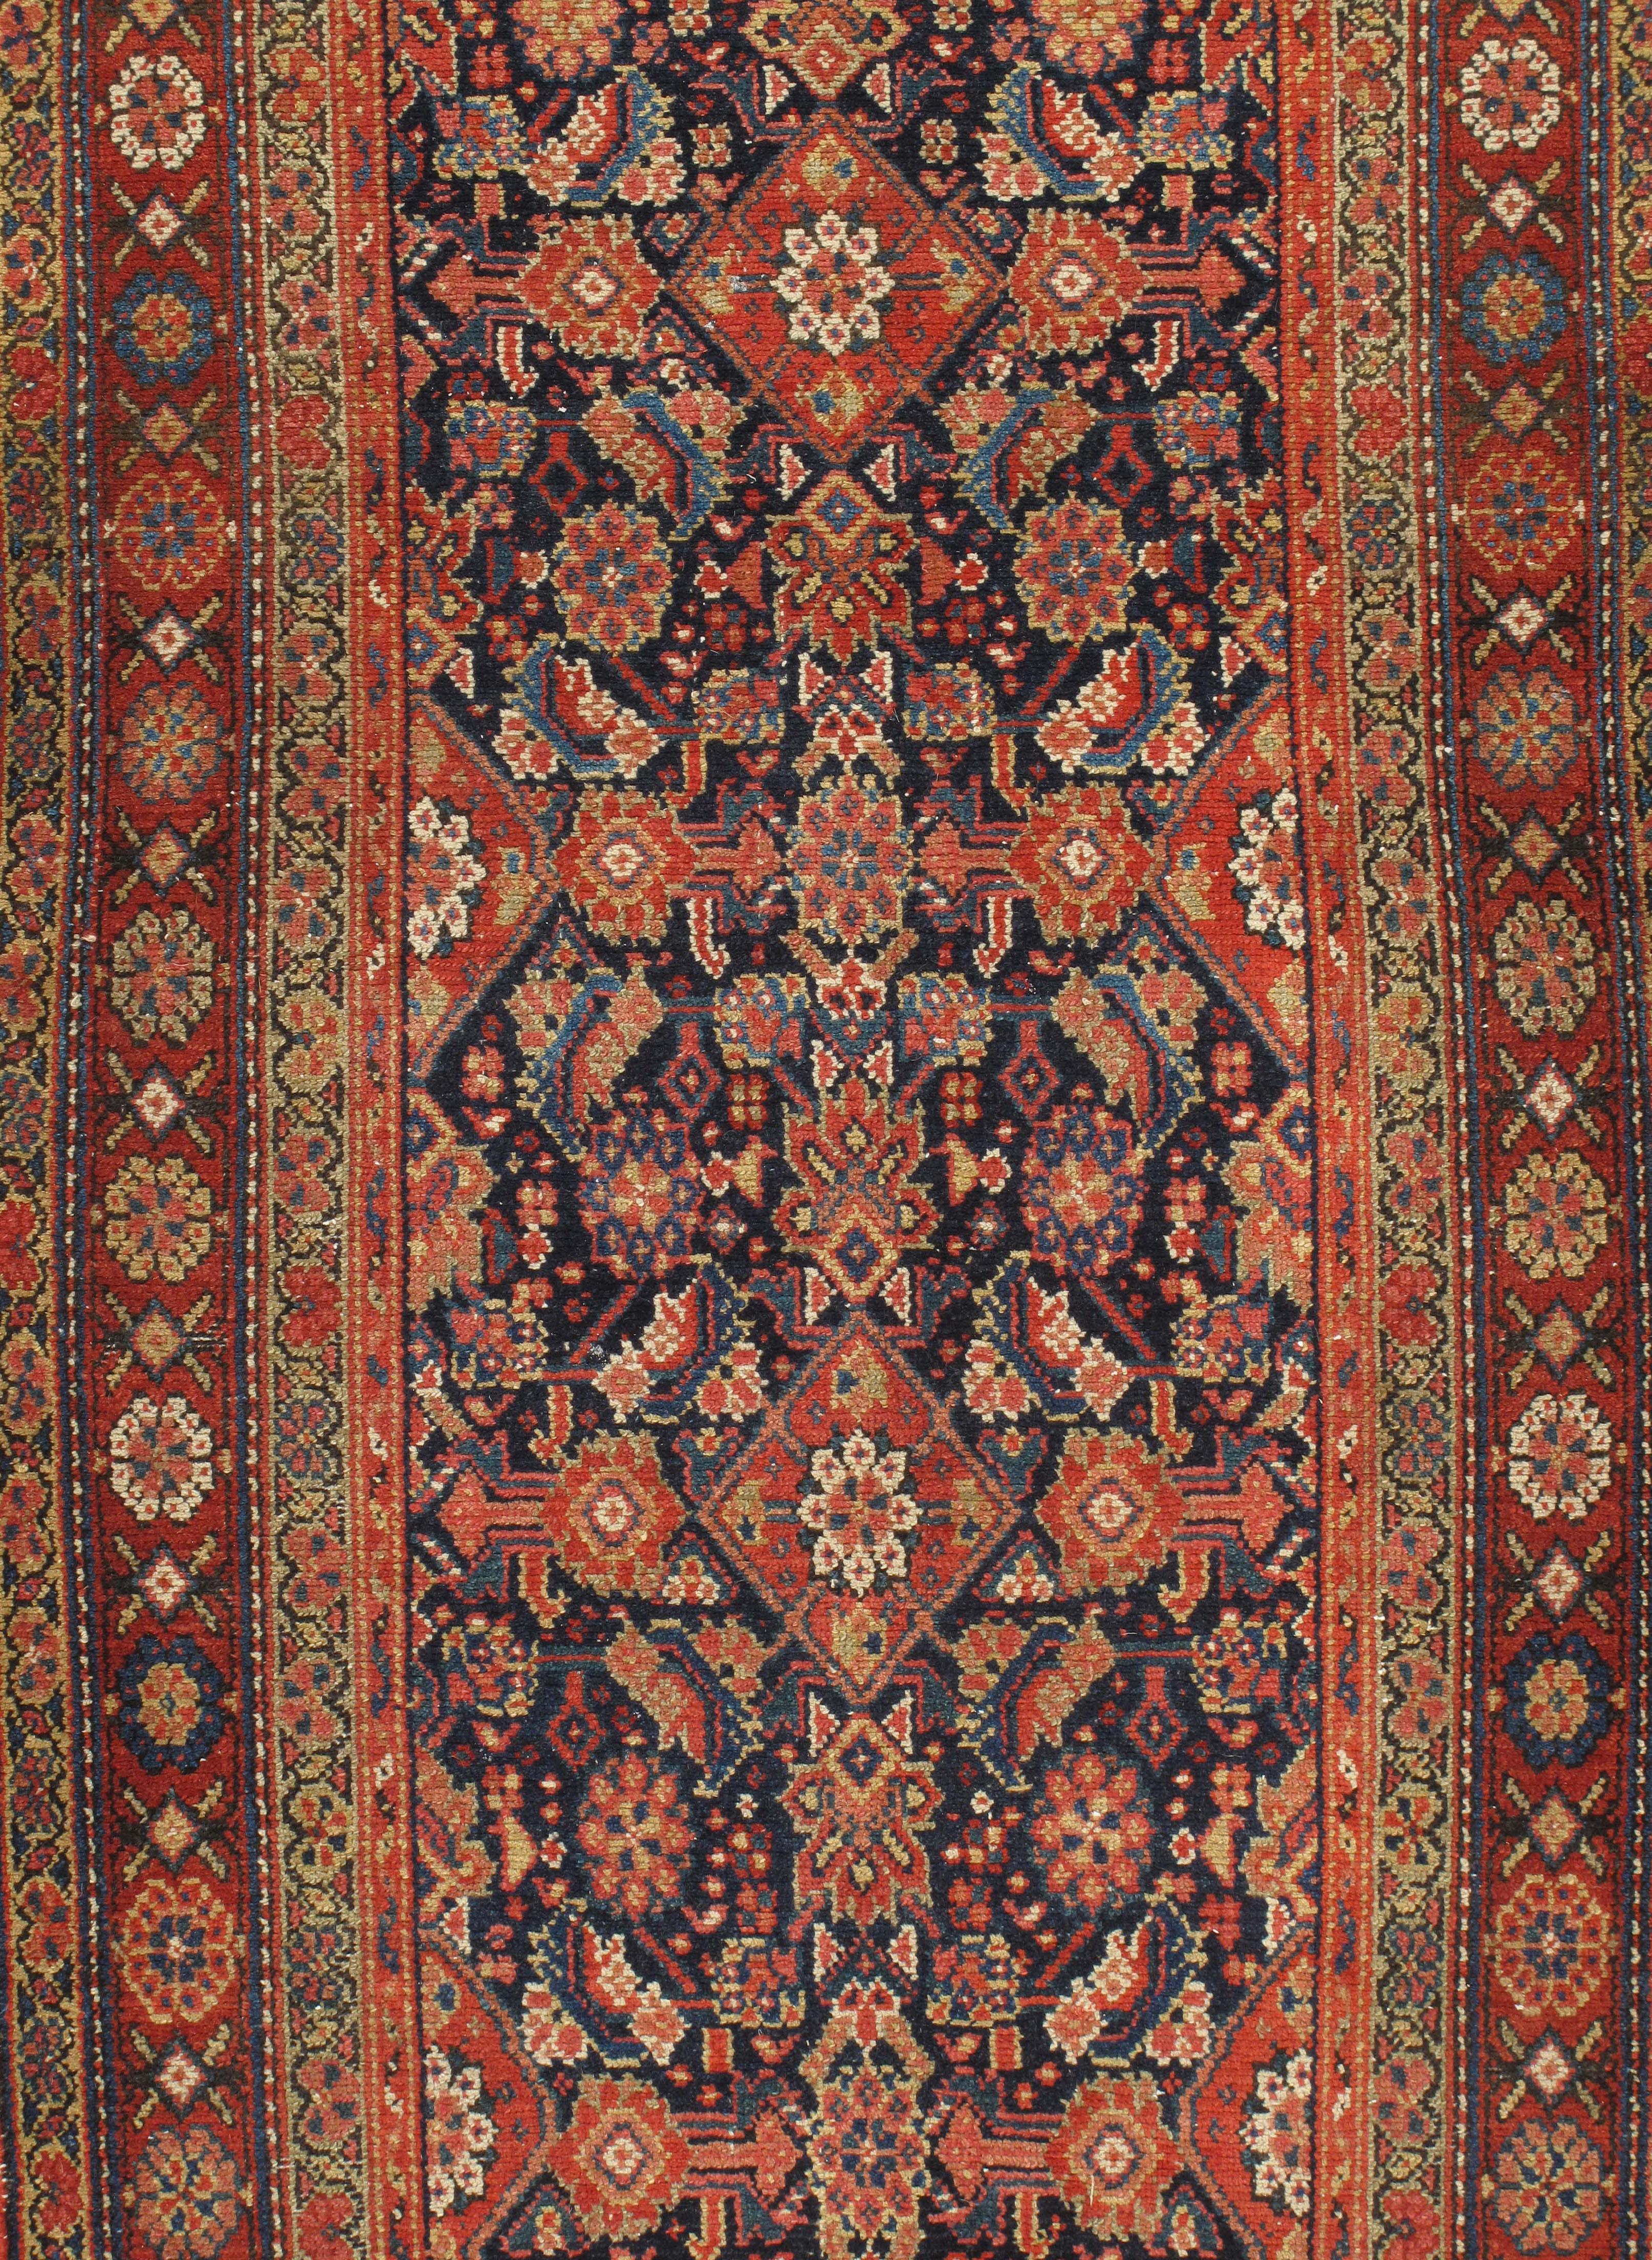 Vintage Persian Malayer rug Runner, circa 1920, 3'3 x 15'9. Vintage hand knotted Persian Malayer runner, circa 1920. The rug is in very good condition with a low pile that adds the patina so special in antique and vintage rugs. Colors: Deep